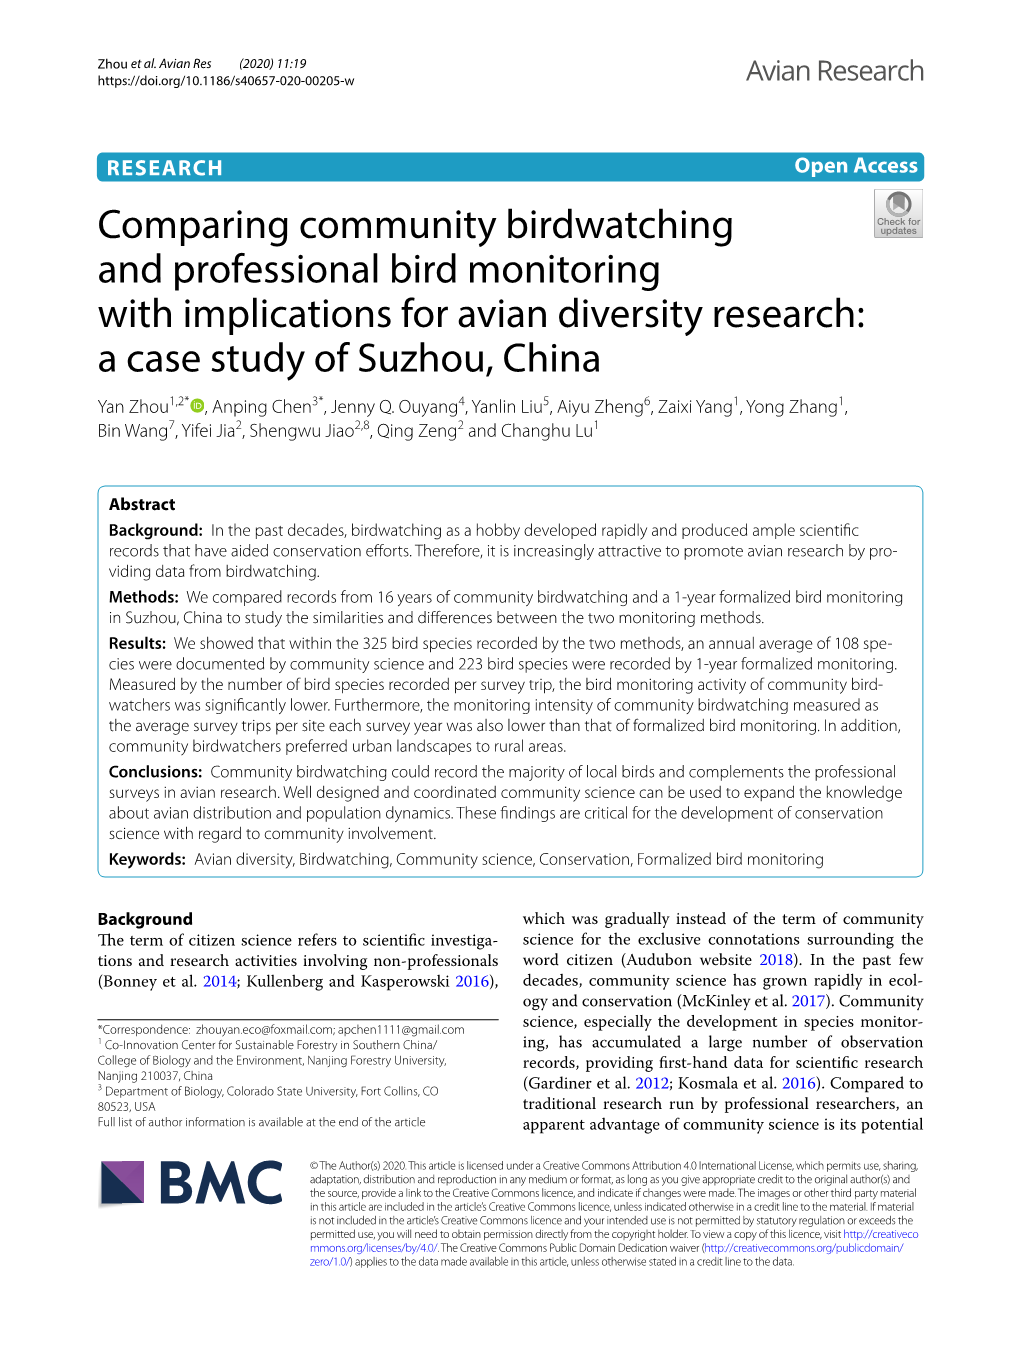 Comparing Community Birdwatching and Professional